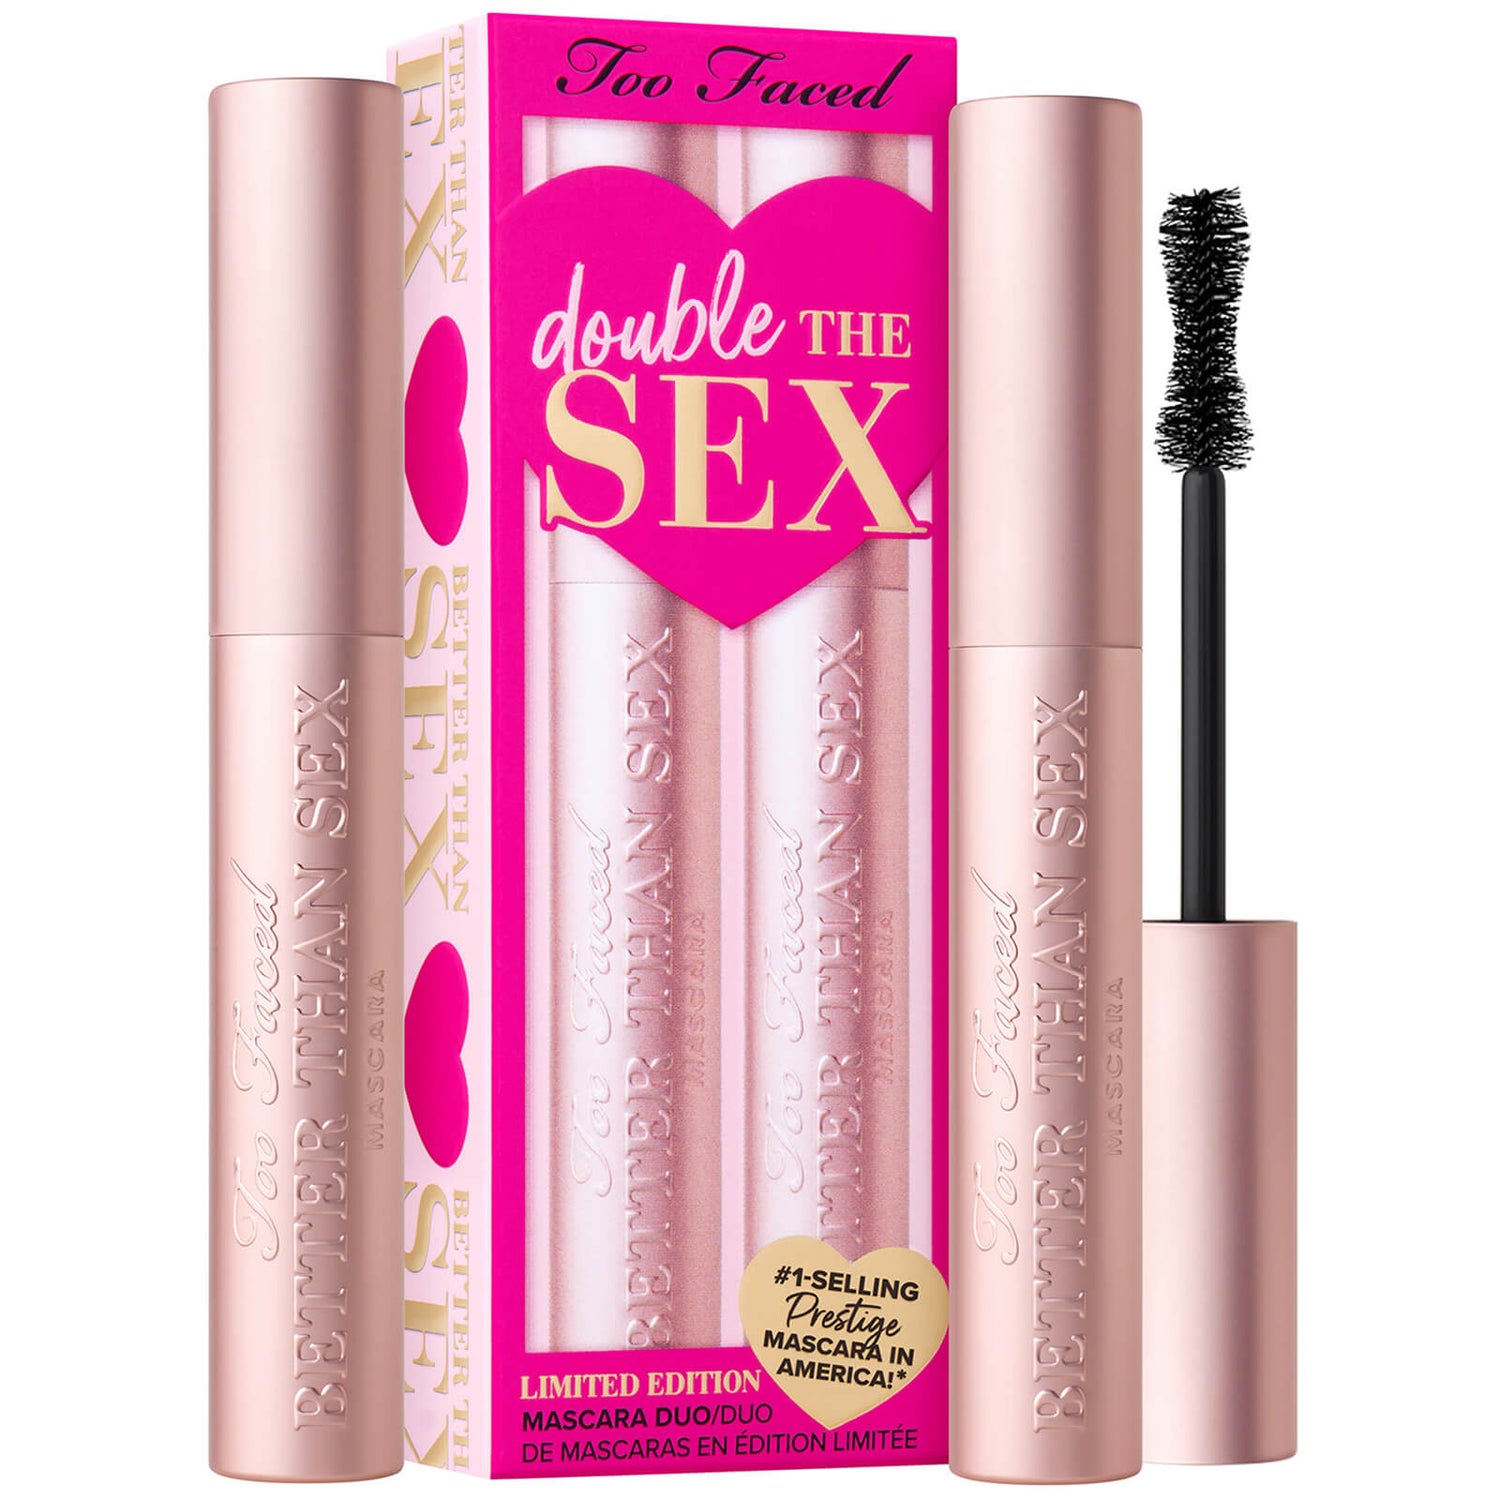 Too Faced Limited Edition Double The Sex Mascara Set